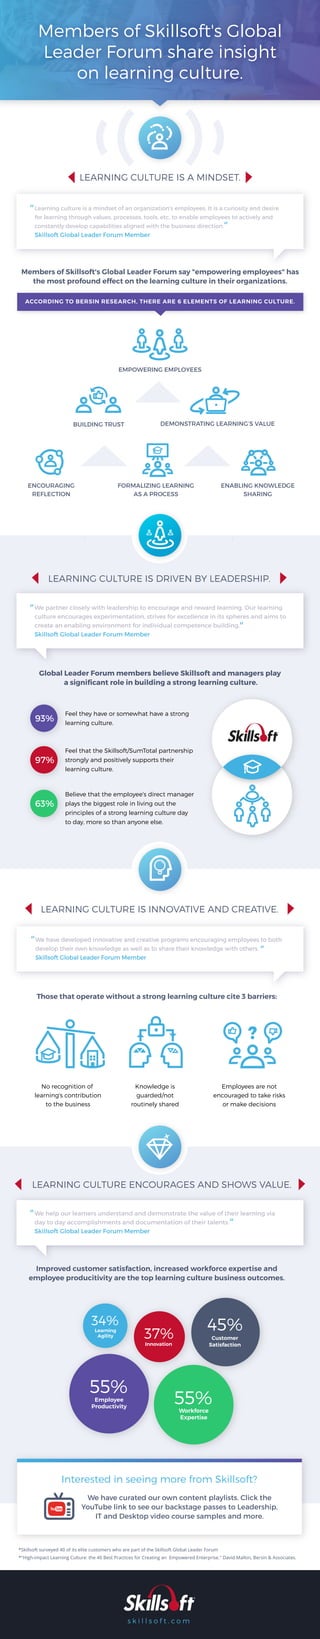 Members of Skillsoft's Global
Leader Forum share insight
on learning culture.
Members of Skillsoft's Global Leader Forum say "empowering employees" has
the most profound effect on the learning culture in their organizations.
ACCORDING TO BERSIN RESEARCH, THERE ARE 6 ELEMENTS OF LEARNING CULTURE.
Learning culture is a mindset of an organization's employees. It is a curiosity and desire
for learning through values, processes, tools, etc. to enable employees to actively and
constantly develop capabilities aligned with the business direction.
Skillsoft Global Leader Forum Member
“
“
LEARNING CULTURE IS A MINDSET.
We partner closely with leadership to encourage and reward learning. Our learning
culture encourages experimentation, strives for excellence in its spheres and aims to
create an enabling environment for individual competence building.
Skillsoft Global Leader Forum Member
“
“
We have developed innovative and creative programs encouraging employees to both
develop their own knowledge as well as to share their knowledge with others.
Skillsoft Global Leader Forum Member
“
“
We help our learners understand and demonstrate the value of their learning via
day to day accomplishments and documentation of their talents.
Skillsoft Global Leader Forum Member
“
“
BUILDING TRUST DEMONSTRATING LEARNING’S VALUE
ENABLING KNOWLEDGE
SHARING
ENCOURAGING
REFLECTION
Global Leader Forum members believe Skillsoft and managers play
a signiﬁcant role in building a strong learning culture.
Feel they have or somewhat have a strong
learning culture.
93%
Feel that the Skillsoft/SumTotal partnership
strongly and positively supports their
learning culture.
97%
Believe that the employee's direct manager
plays the biggest role in living out the
principles of a strong learning culture day
to day, more so than anyone else.
63%
Those that operate without a strong learning culture cite 3 barriers:
Improved customer satisfaction, increased workforce expertise and
employee producitivity are the top learning culture business outcomes.
We have curated our own content playlists. Click the
YouTube link to see our backstage passes to Leadership,
IT and Desktop video course samples and more.
*Skillsoft surveyed 40 of its elite customers who are part of the Skillsoft Global Leader Forum
*"High-impact Learning Culture: the 40 Best Practices for Creating an Empowered Enterprise." David Mallon, Bersin & Associates.
LEARNING CULTURE ENCOURAGES AND SHOWS VALUE.
LEARNING CULTURE IS INNOVATIVE AND CREATIVE.
LEARNING CULTURE IS DRIVEN BY LEADERSHIP.
No recognition of
learning's contribution
to the business
Knowledge is
guarded/not
routinely shared
Employees are not
encouraged to take risks
or make decisions
Learning
Agility
34%
Innovation
37% Customer
Satisfaction
45%
Employee
Productivity
55%
Workforce
Expertise
55%
s k i l l s o f t . c o m
EMPOWERING EMPLOYEES
FORMALIZING LEARNING
AS A PROCESS
?
Interested in seeing more from Skillsoft?
 